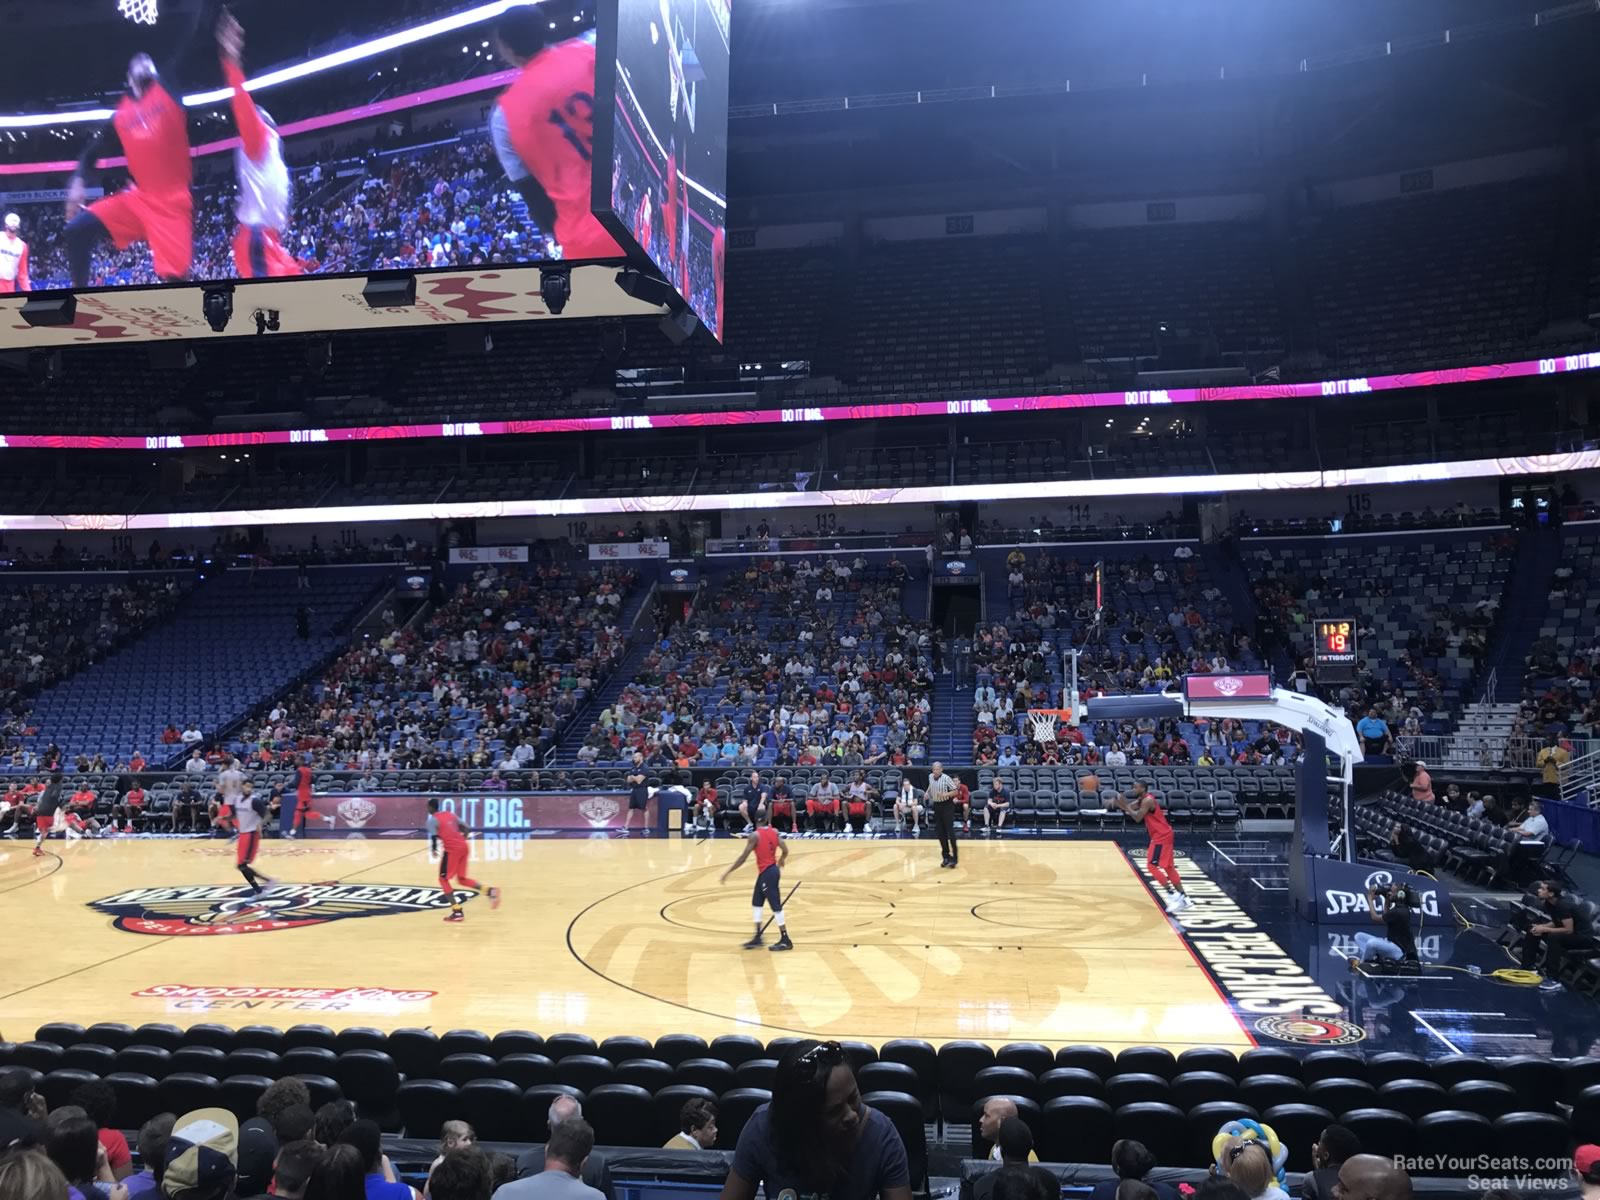 section 123, row 9 seat view  for basketball - smoothie king center